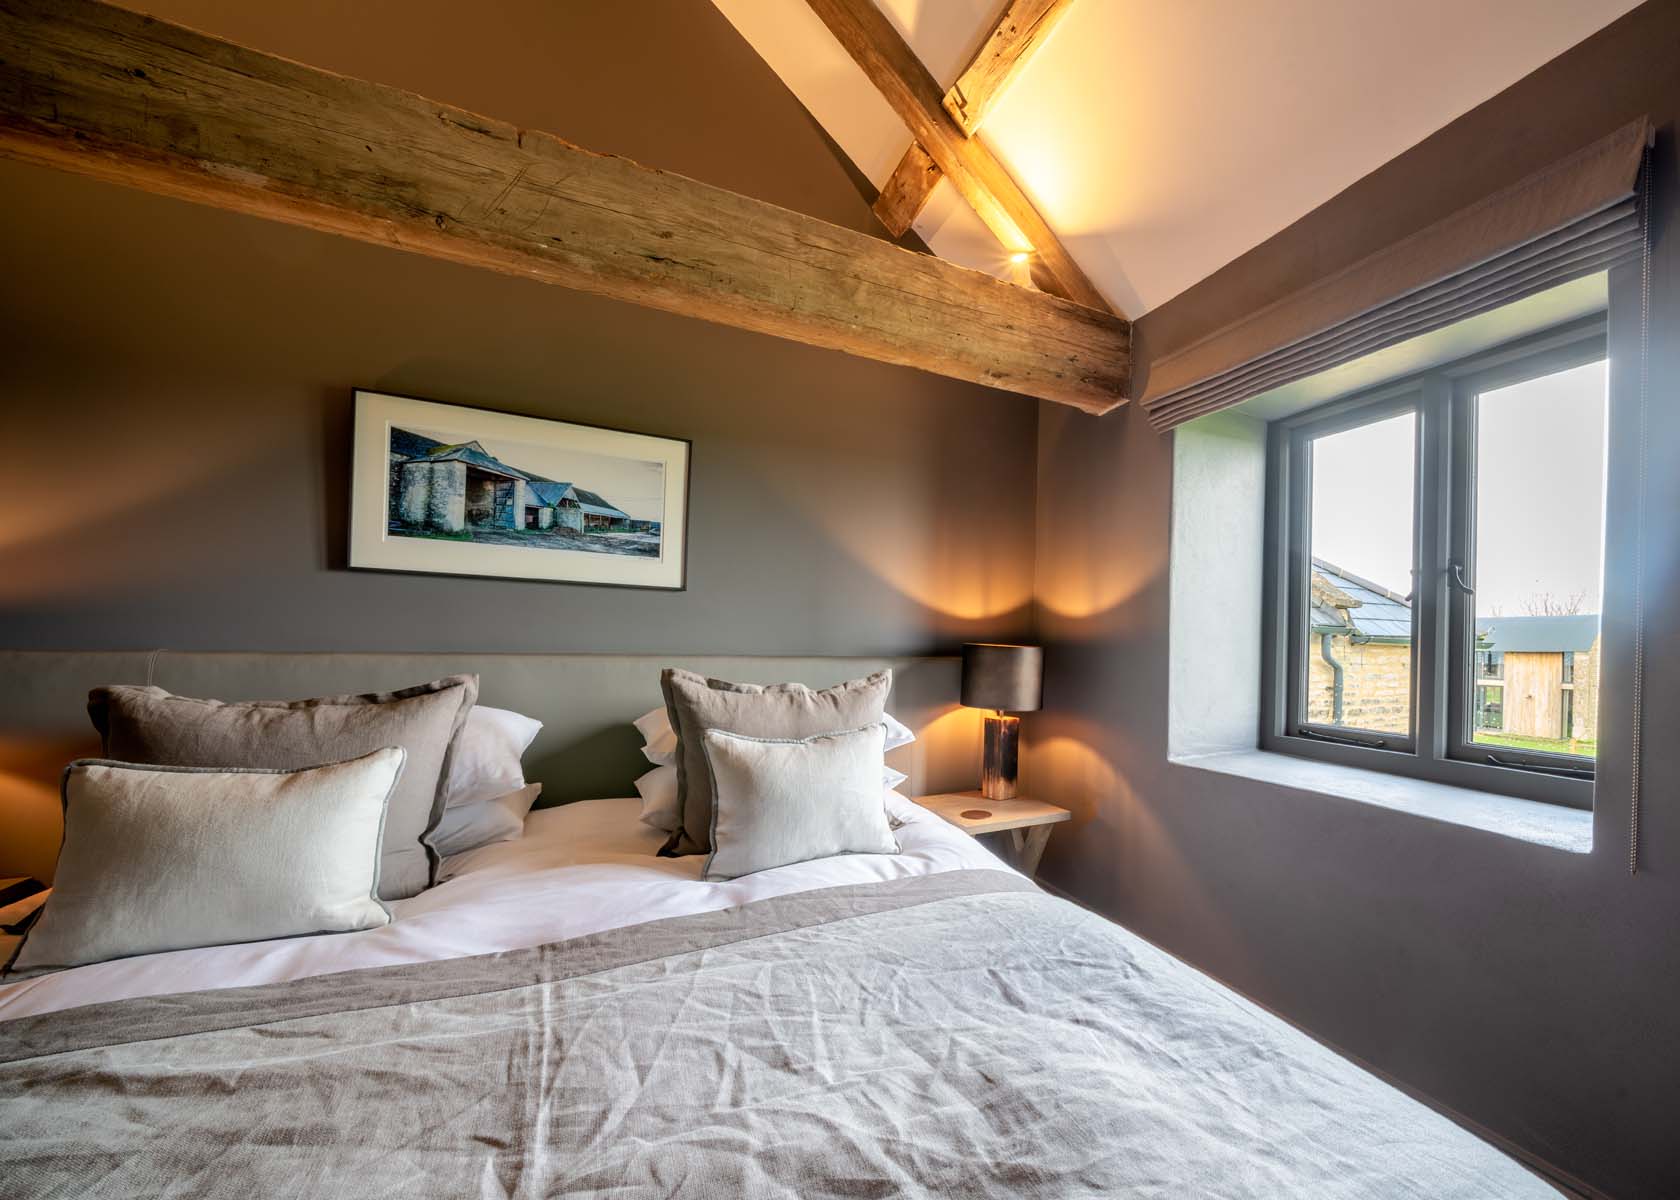 Double bedroom with grey walls and exposed wooden beams